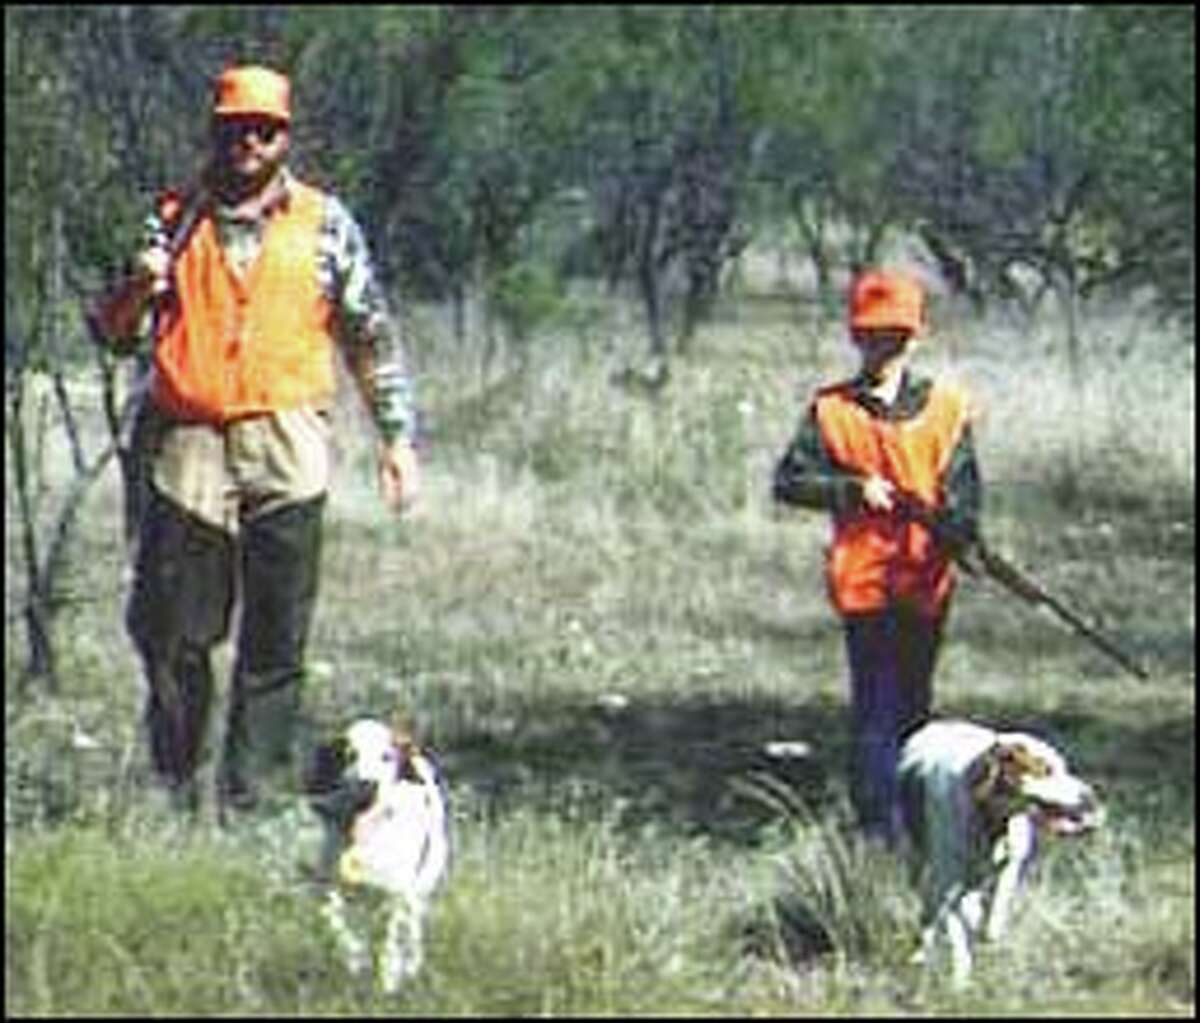 hunter safety education course